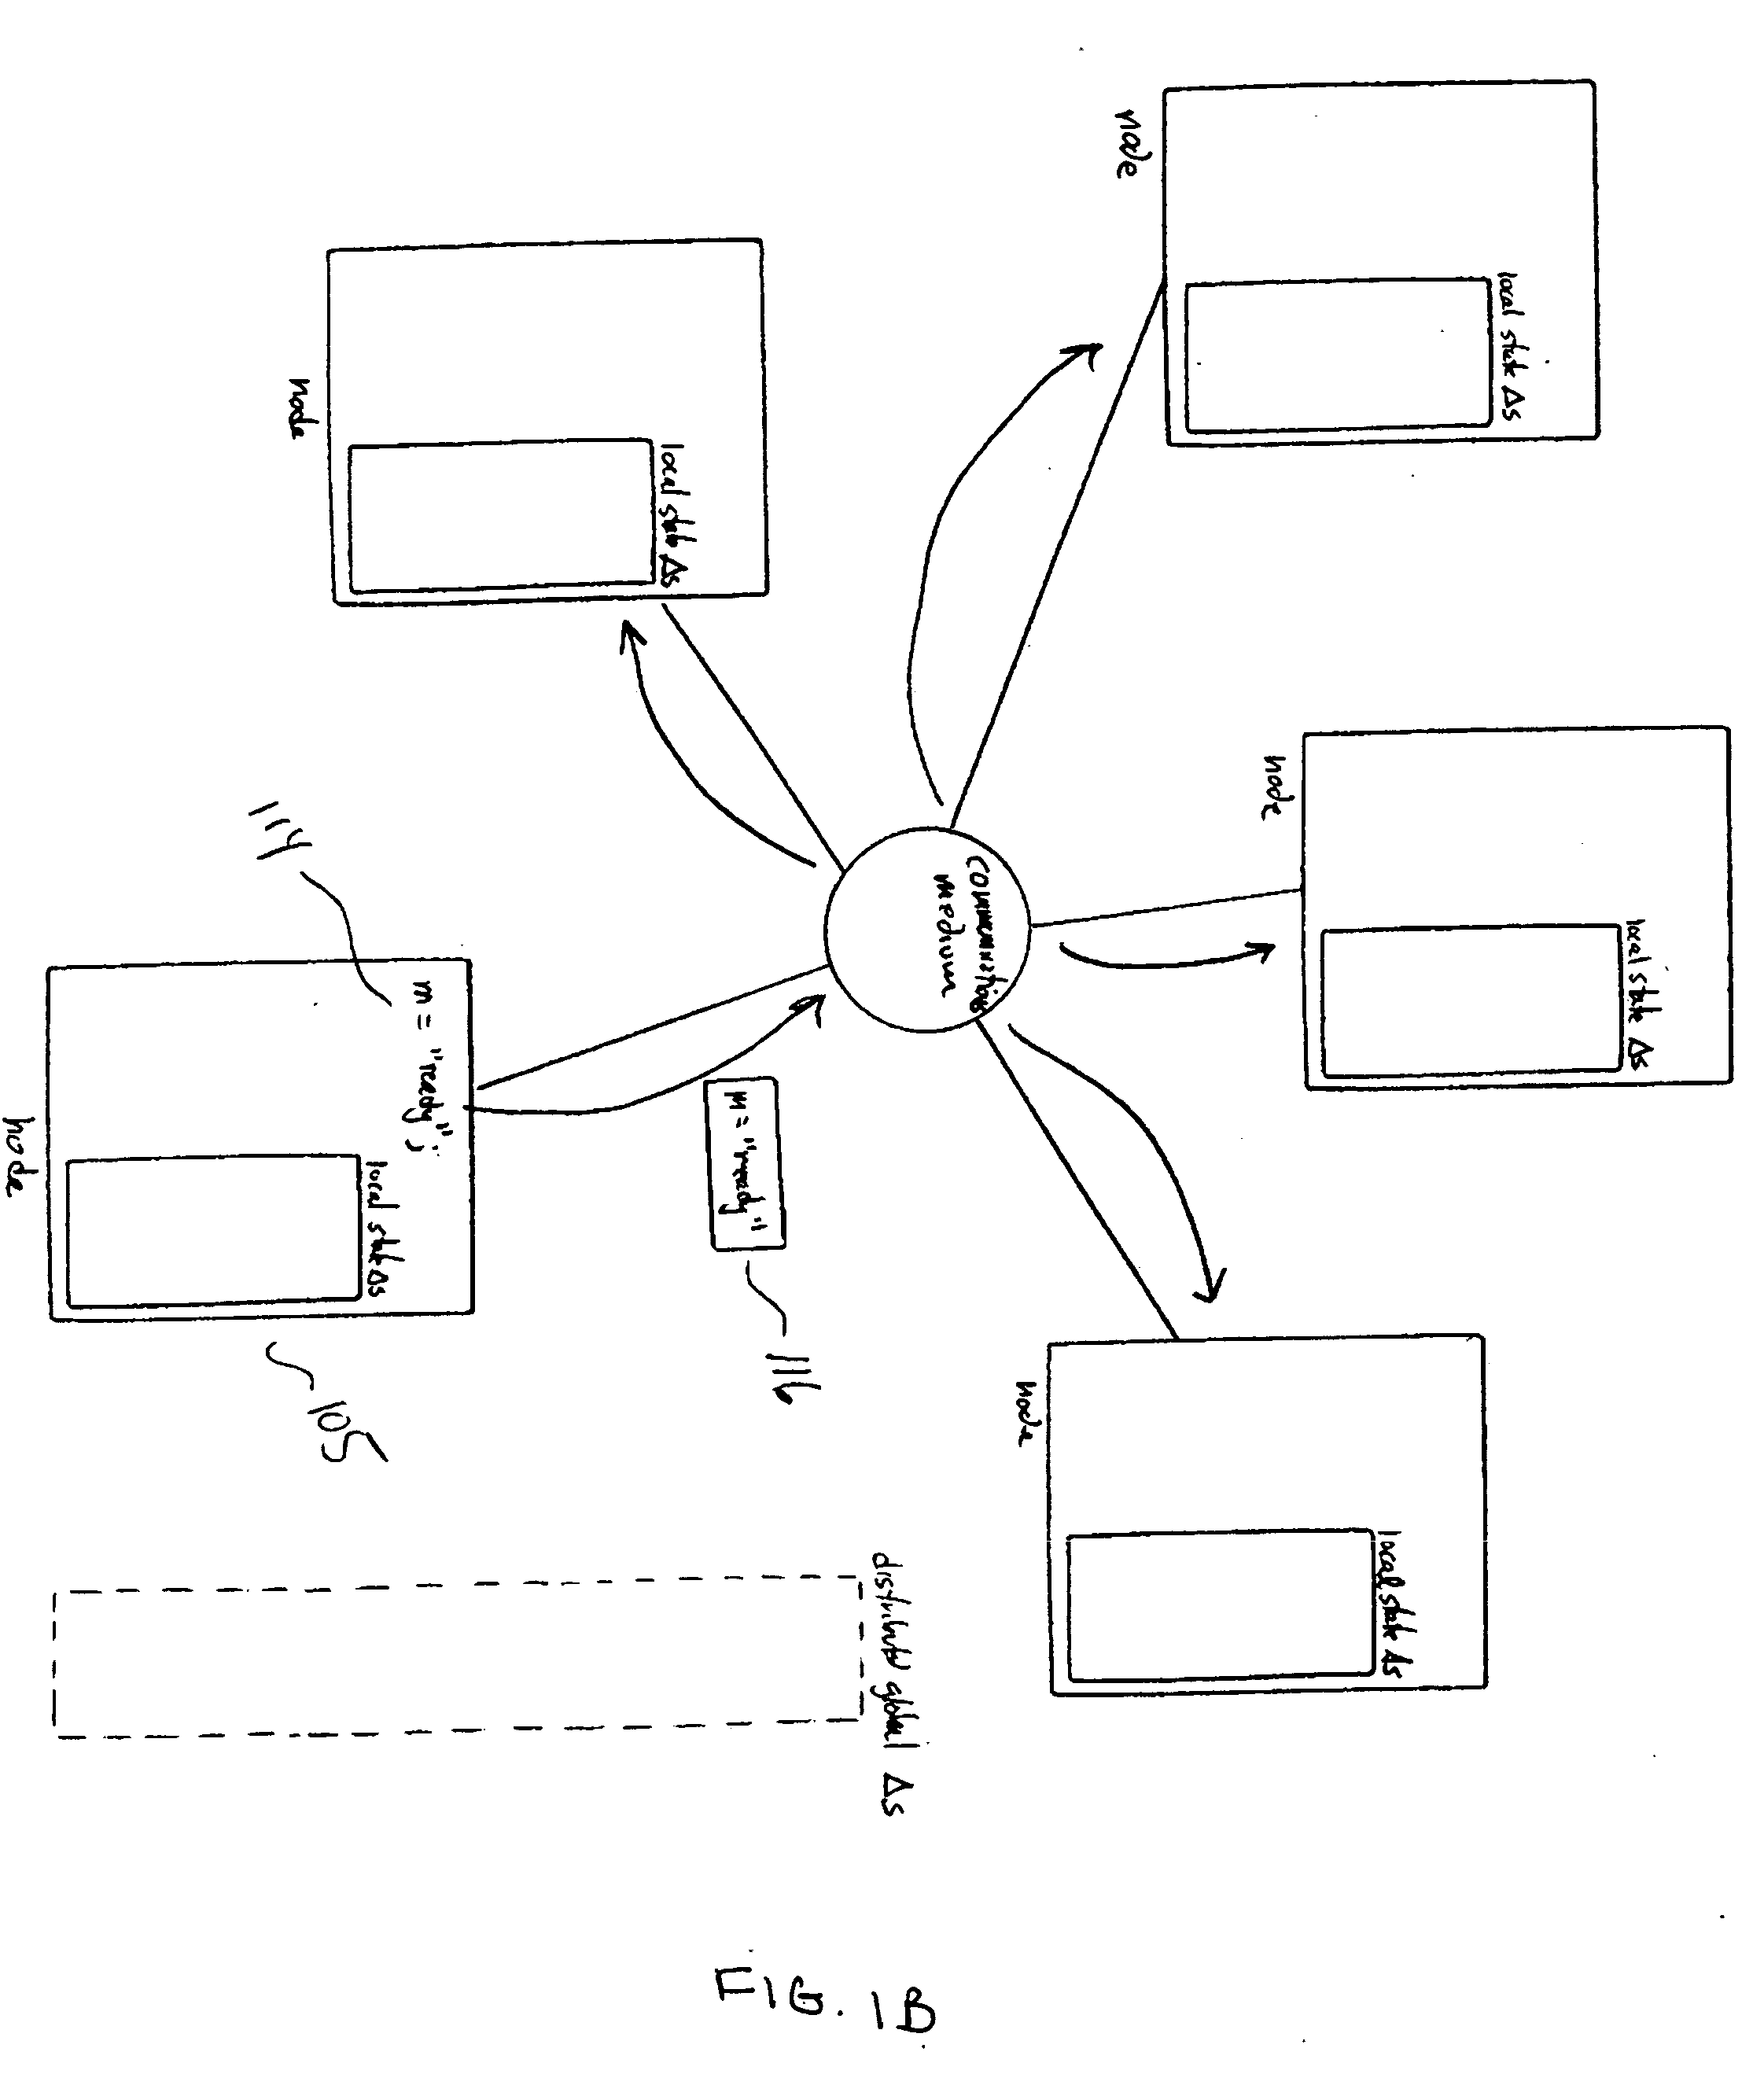 Method and system for strong-leader election in a distributed computer system